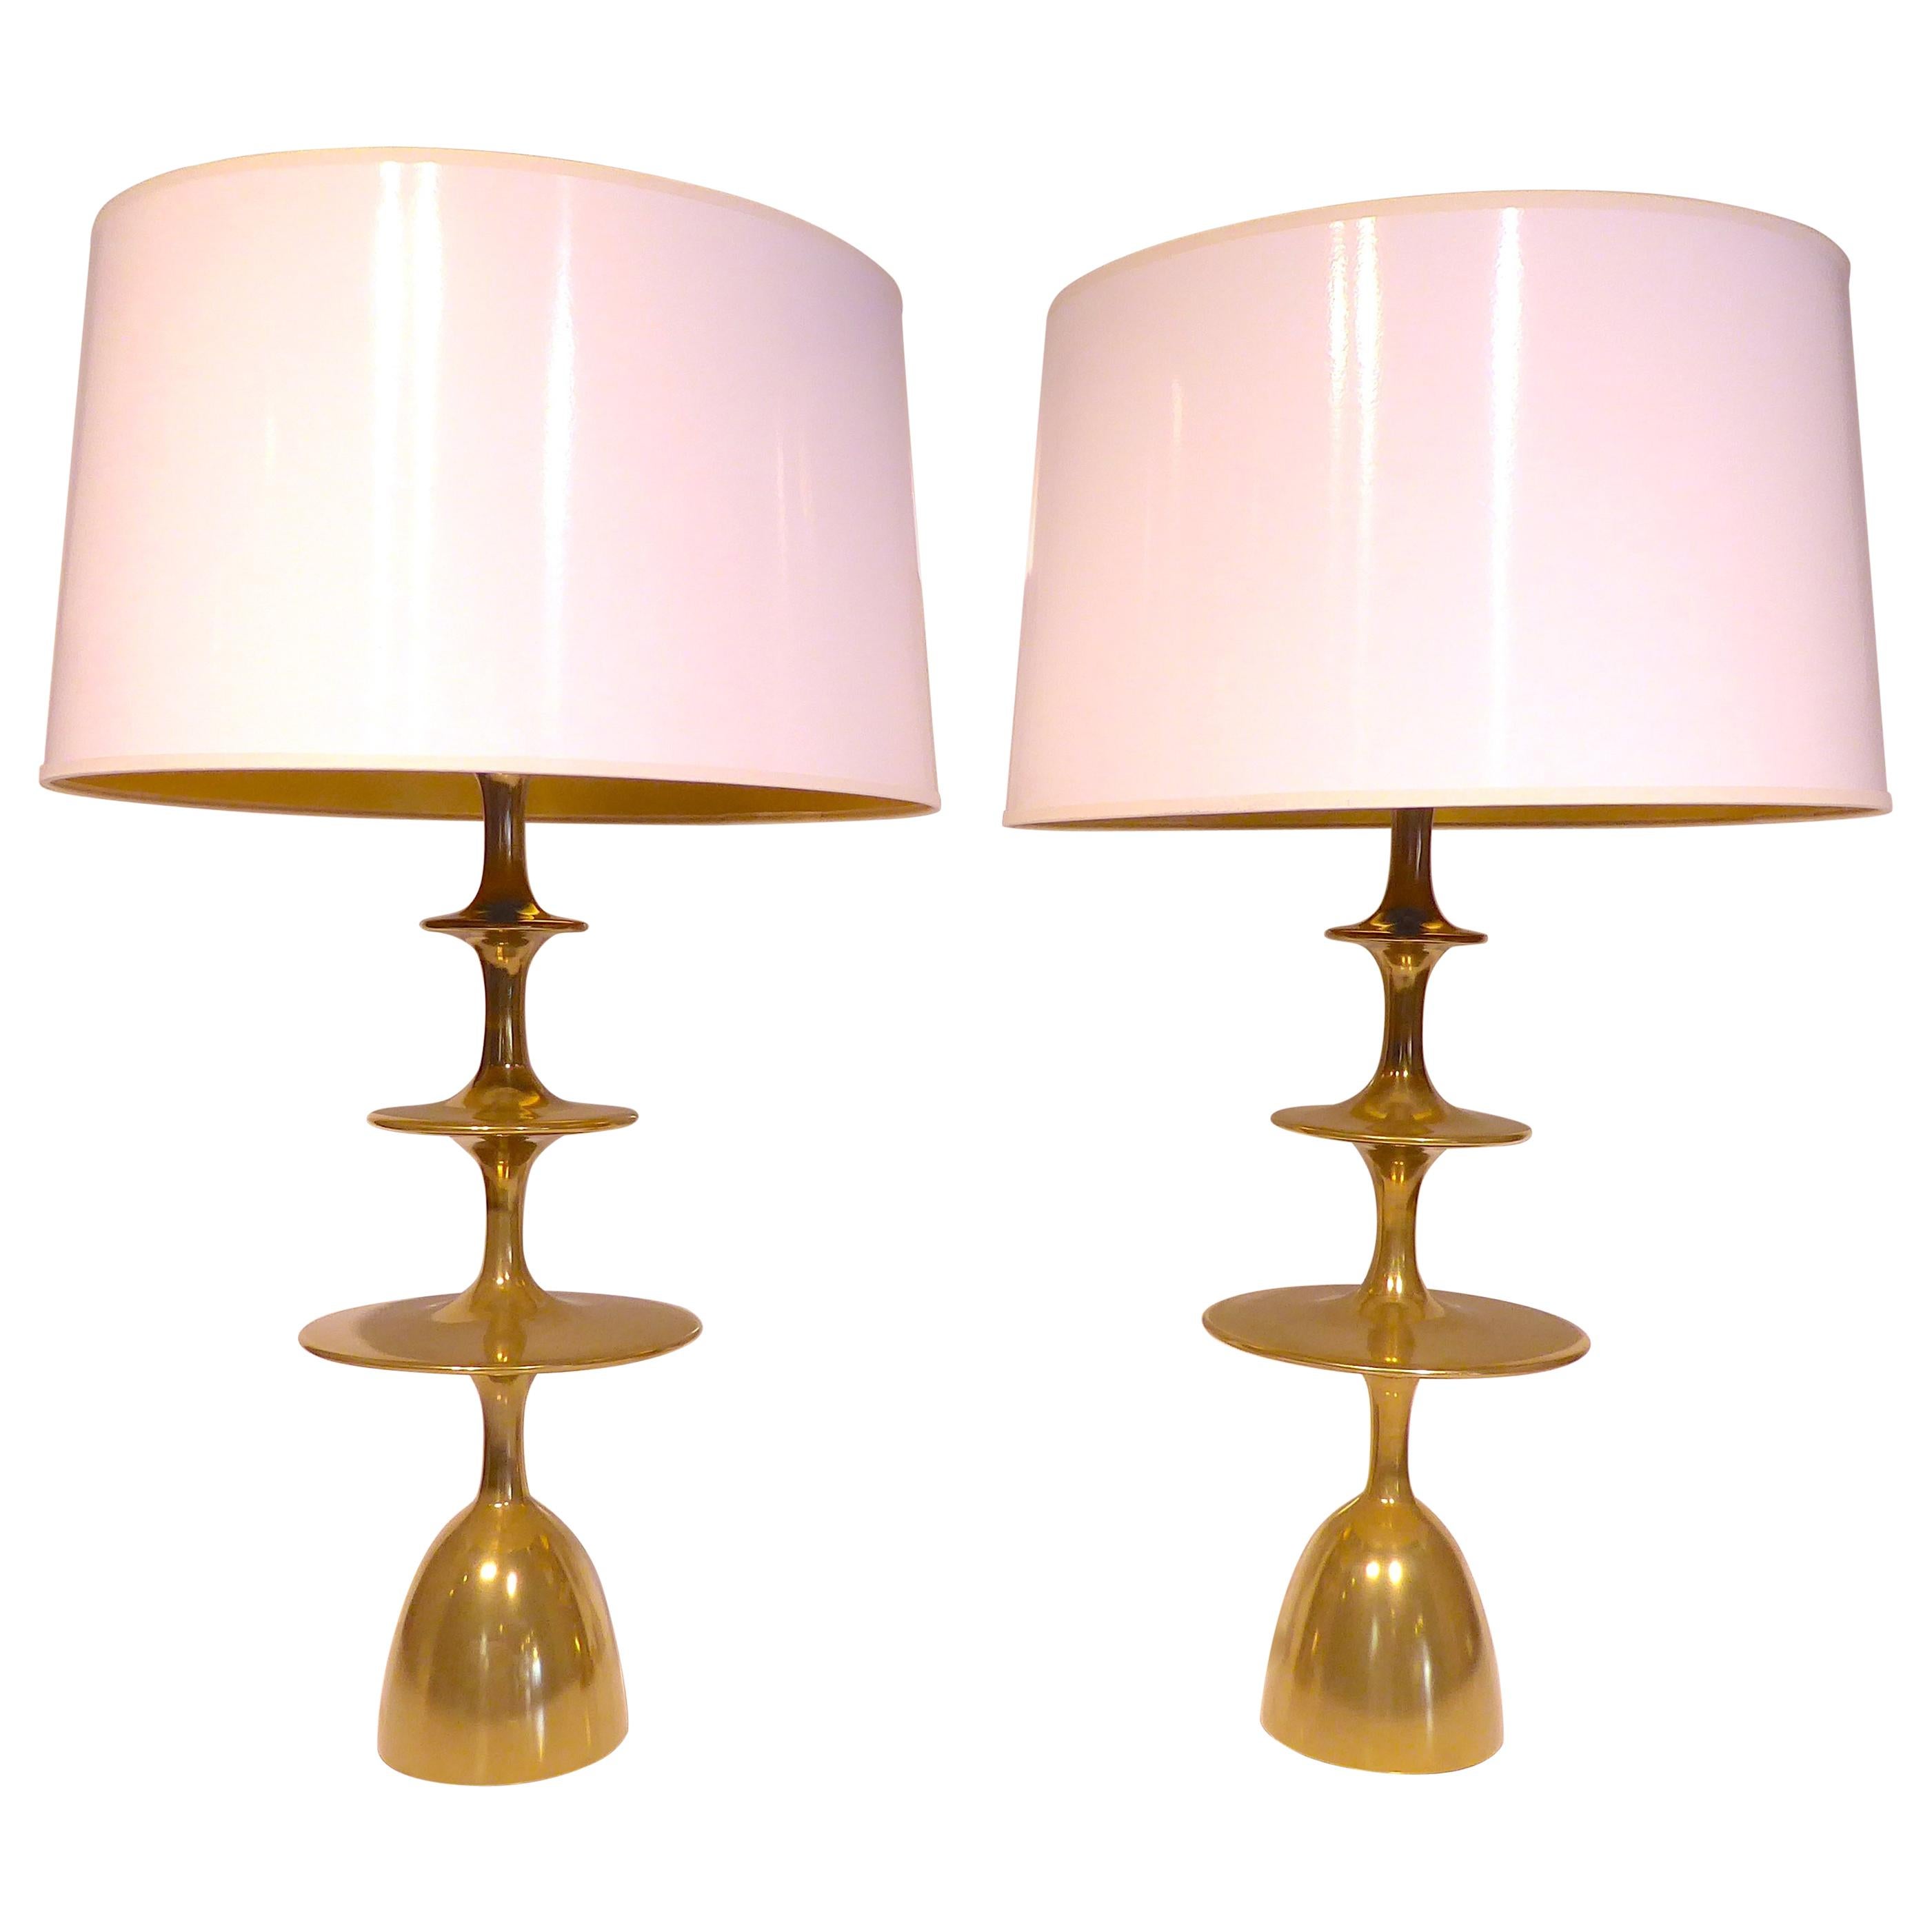 Pair of Christopher Anthony Ltd. "Metro" Table Lamps in Brass Coated Finish For Sale